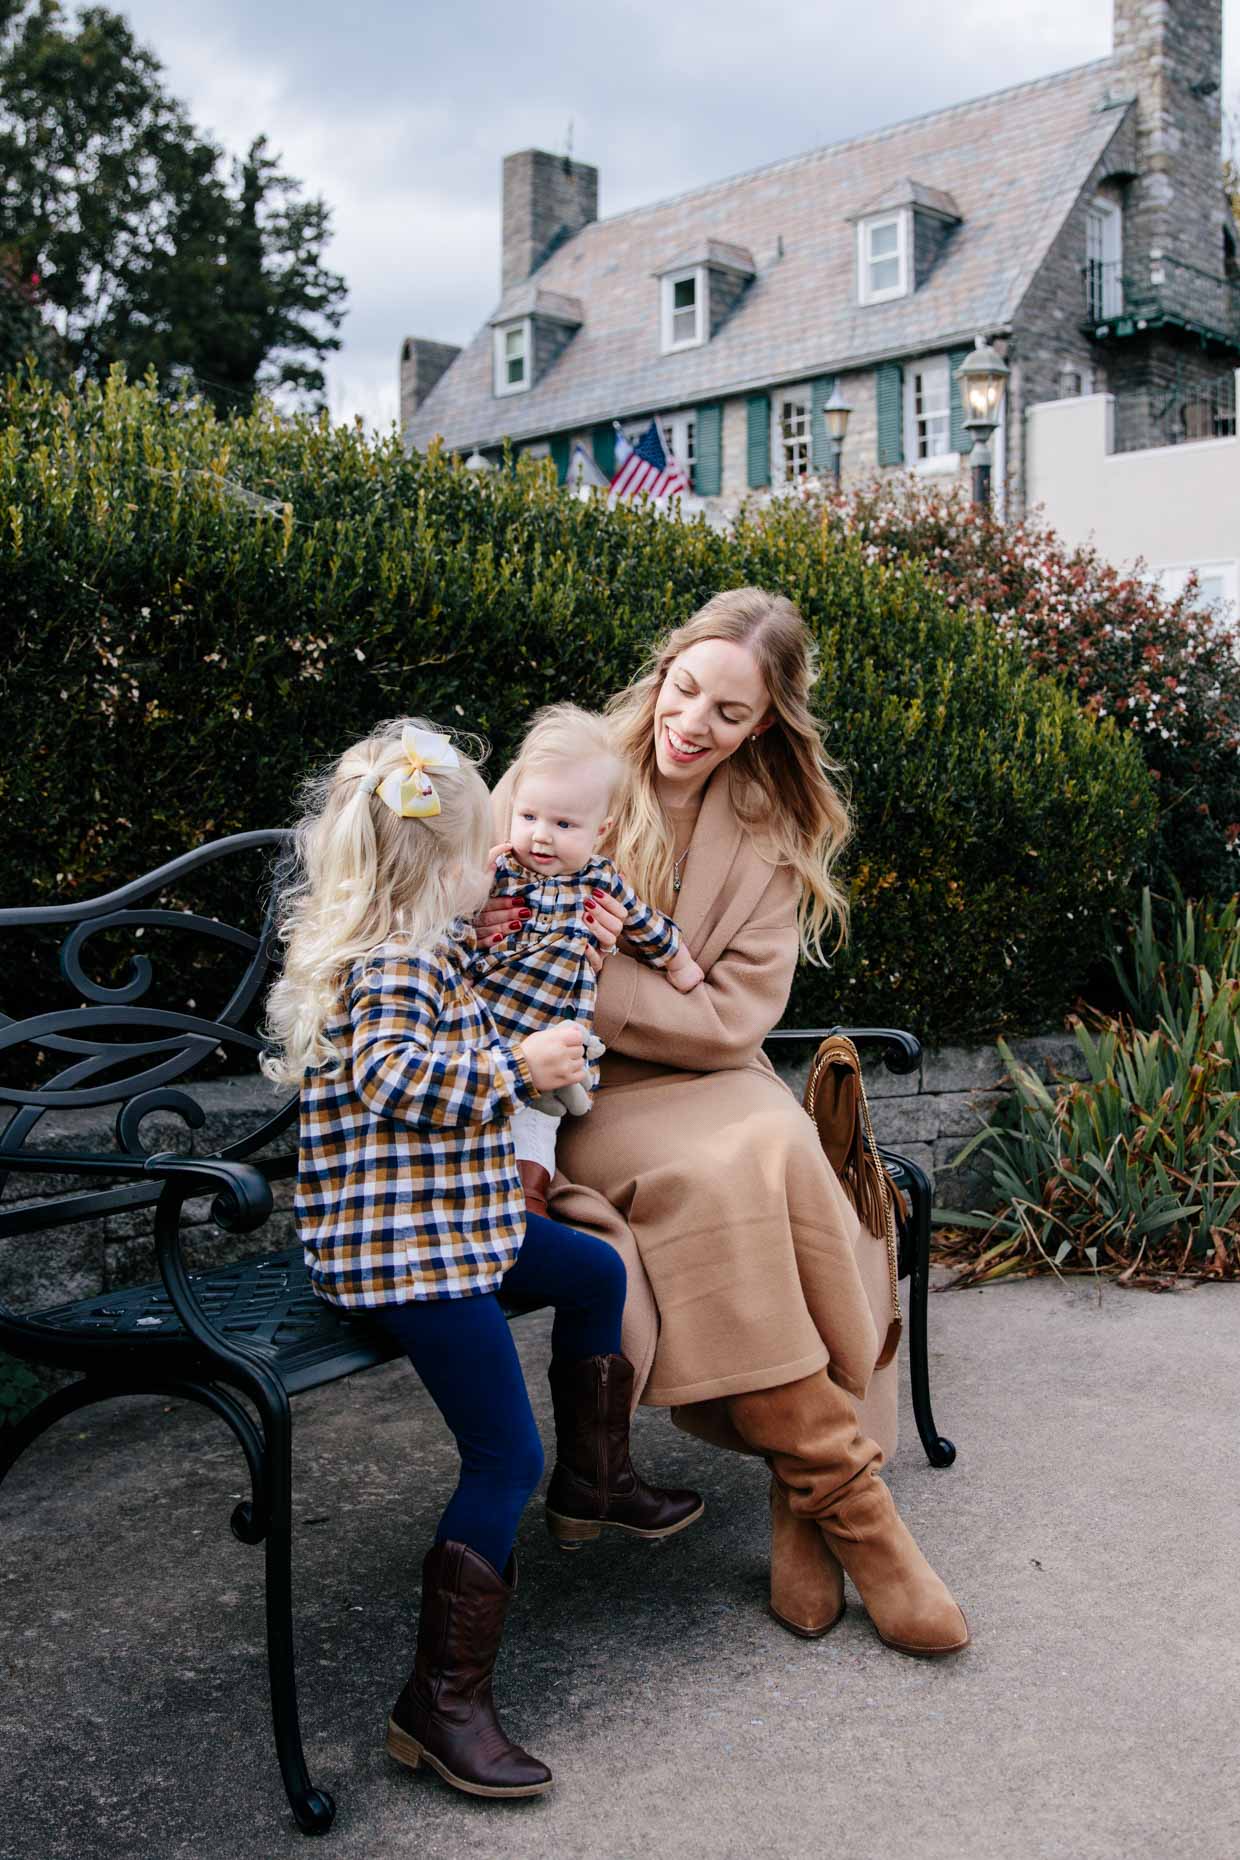 Meagan Brandon of Meagan's Moda shares fall family photo outfit ideas, plaid dresses girl outfits